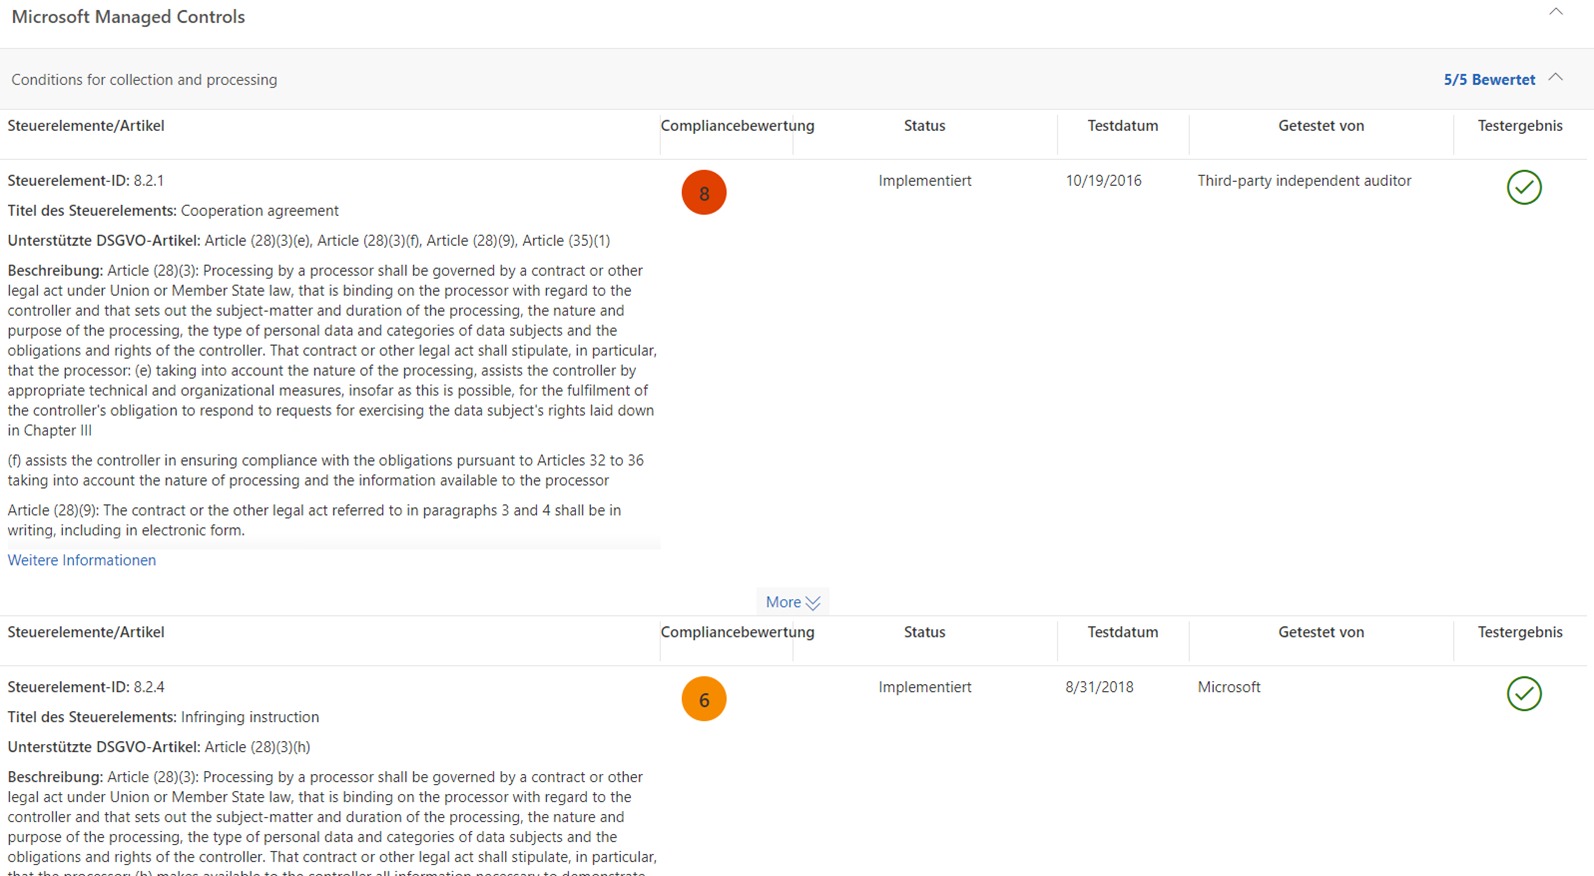 Actions taken under Microsoft's responsibility are documented in the Compliance Manager. Source: Screenshot Microsoft.com